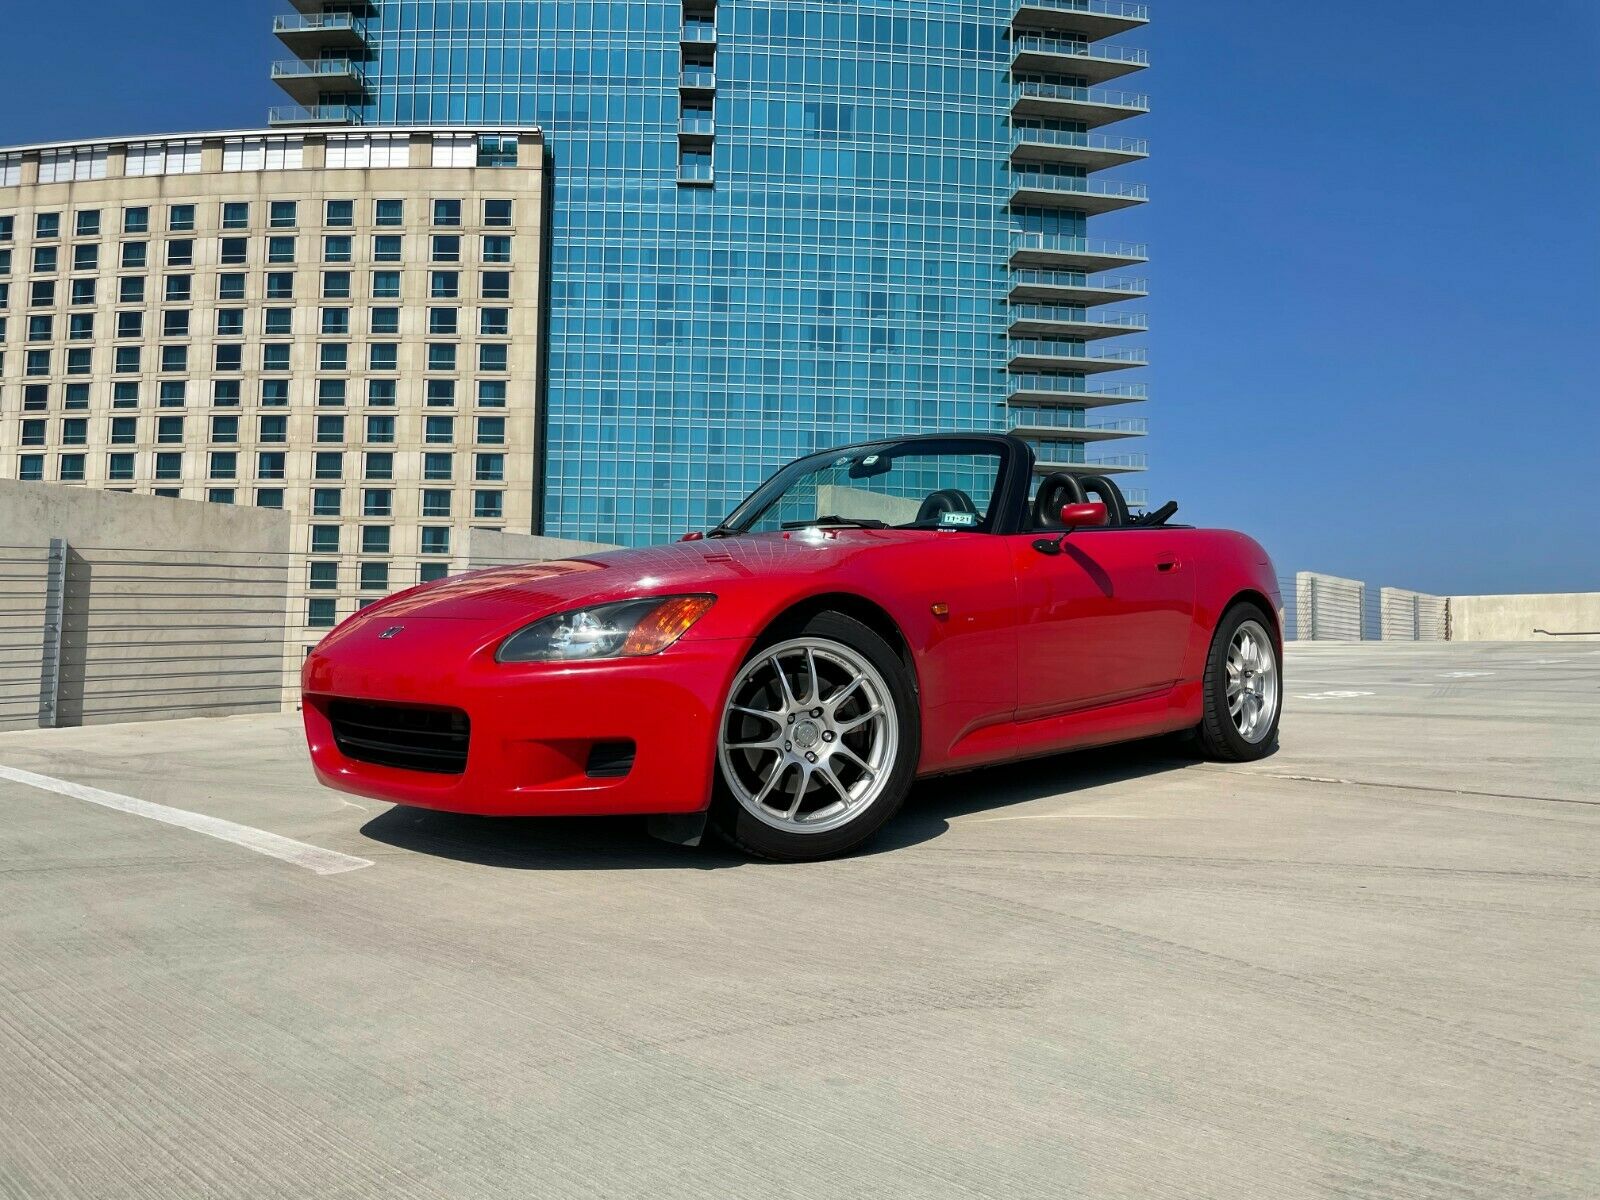 2000 Honda S2000  Well Maintained, Ap1 S2000.  Never Tracked,  Stock Drivetrain. Sensibl Upgrades